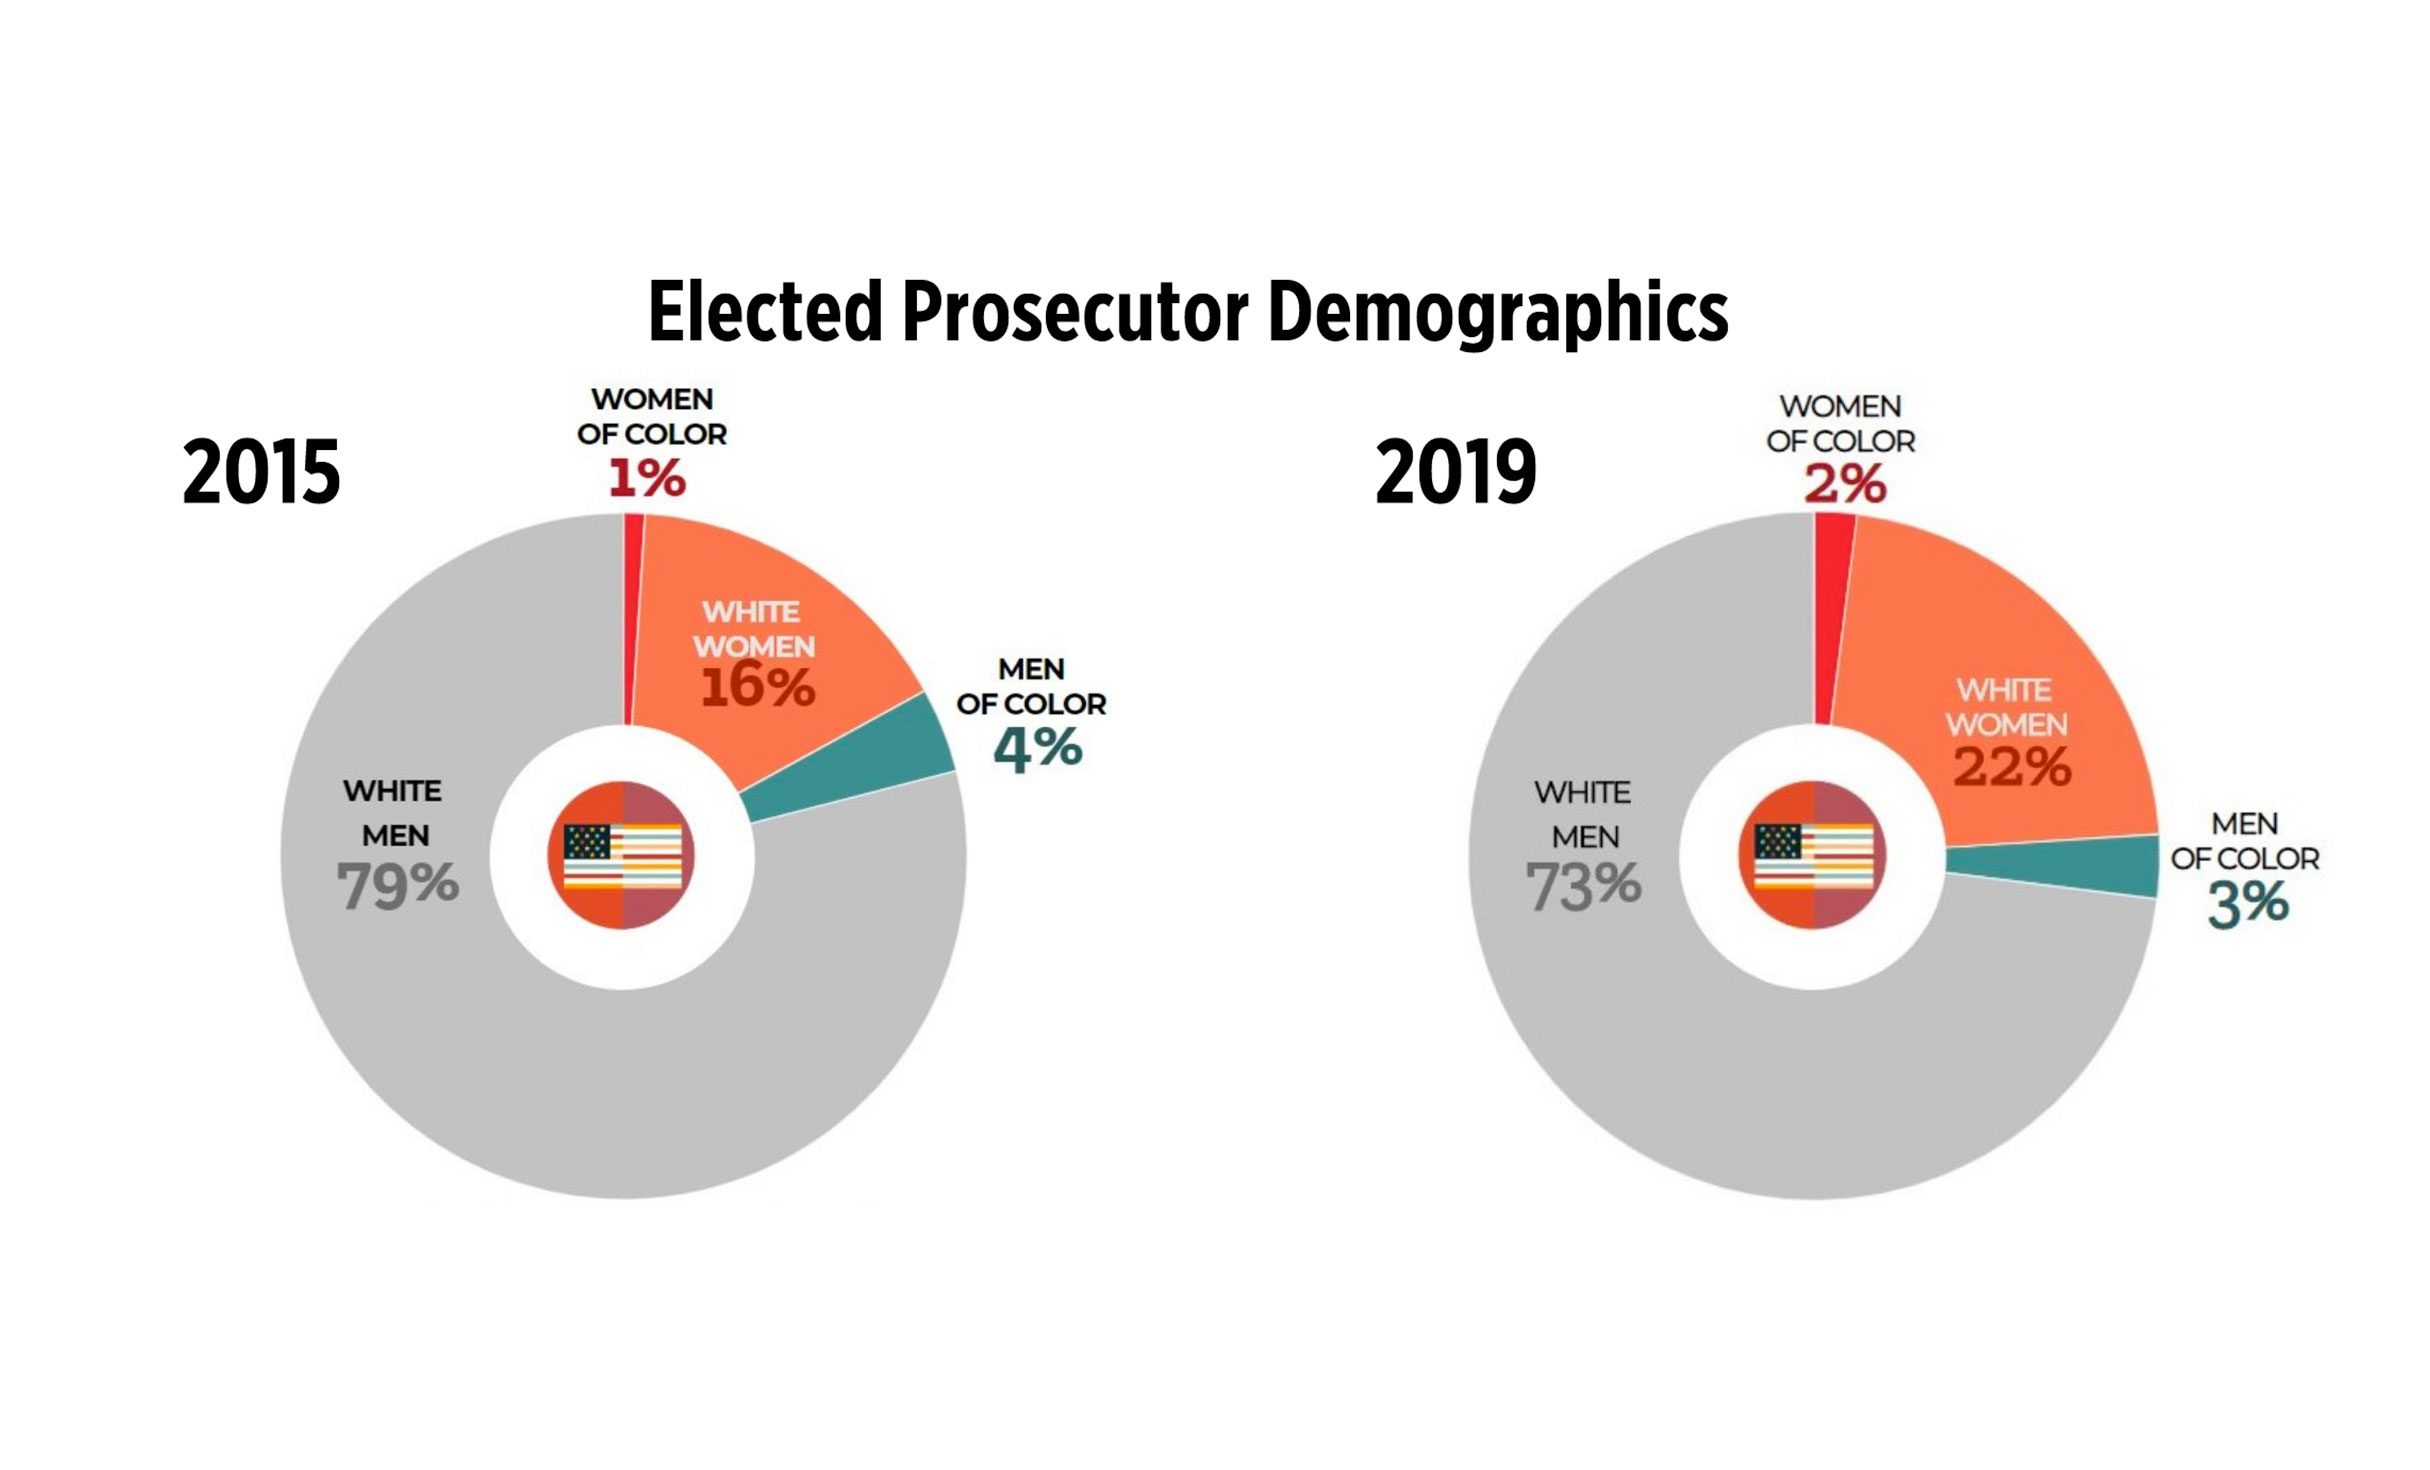 Graphs showing the breakdown of elected prosecutor demographics